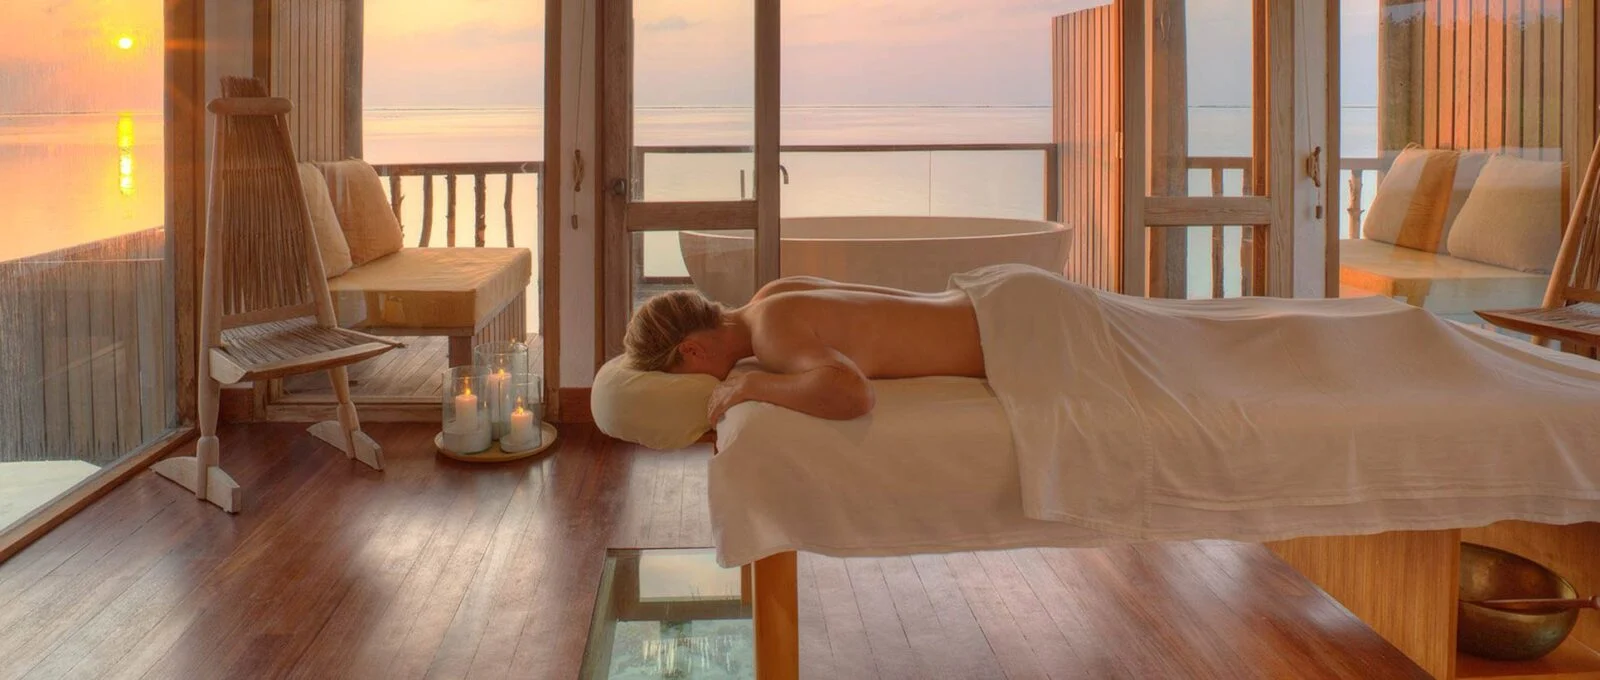 Holistic Healing For Body And Soul: Gili Lankanfushi Introduces Revolutionary New Wellness Experiences At Meera Spa